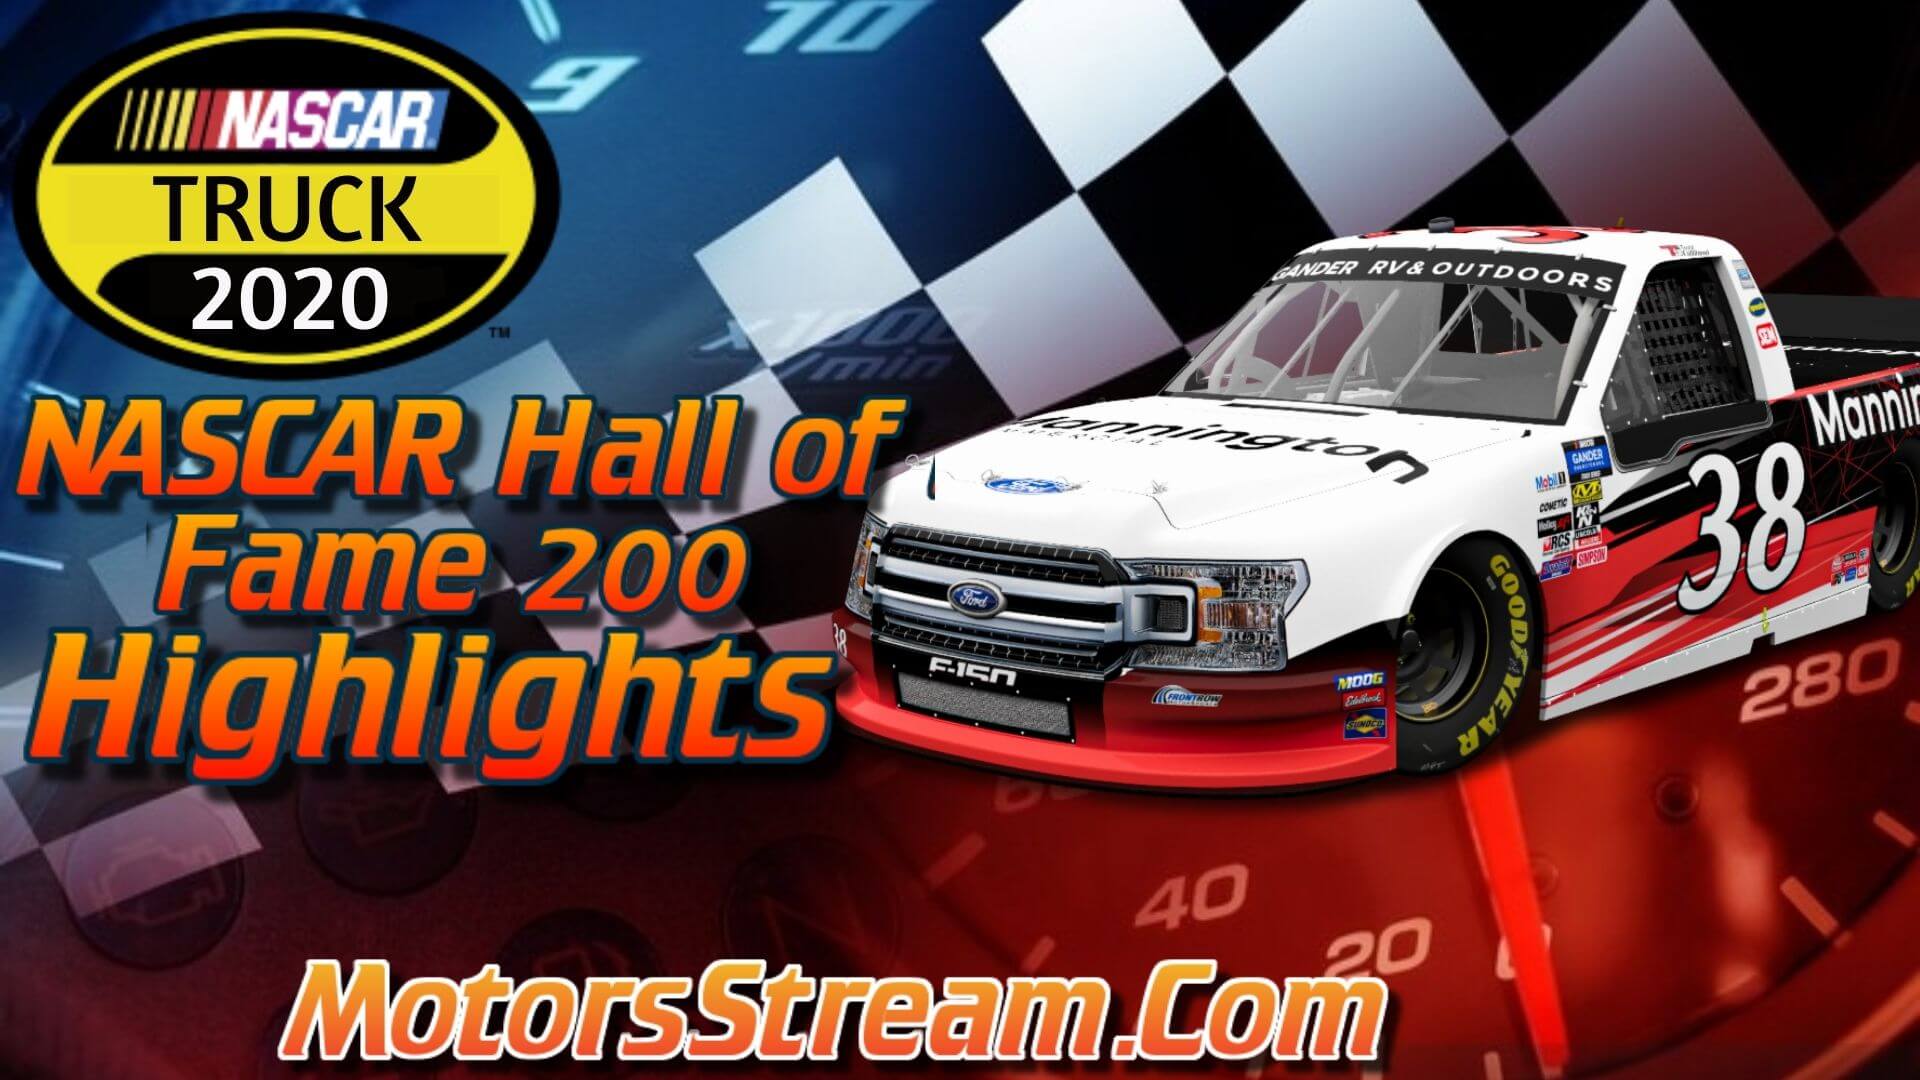 NASCAR Hall of Fame 200 Highlights 2020 Truck Series